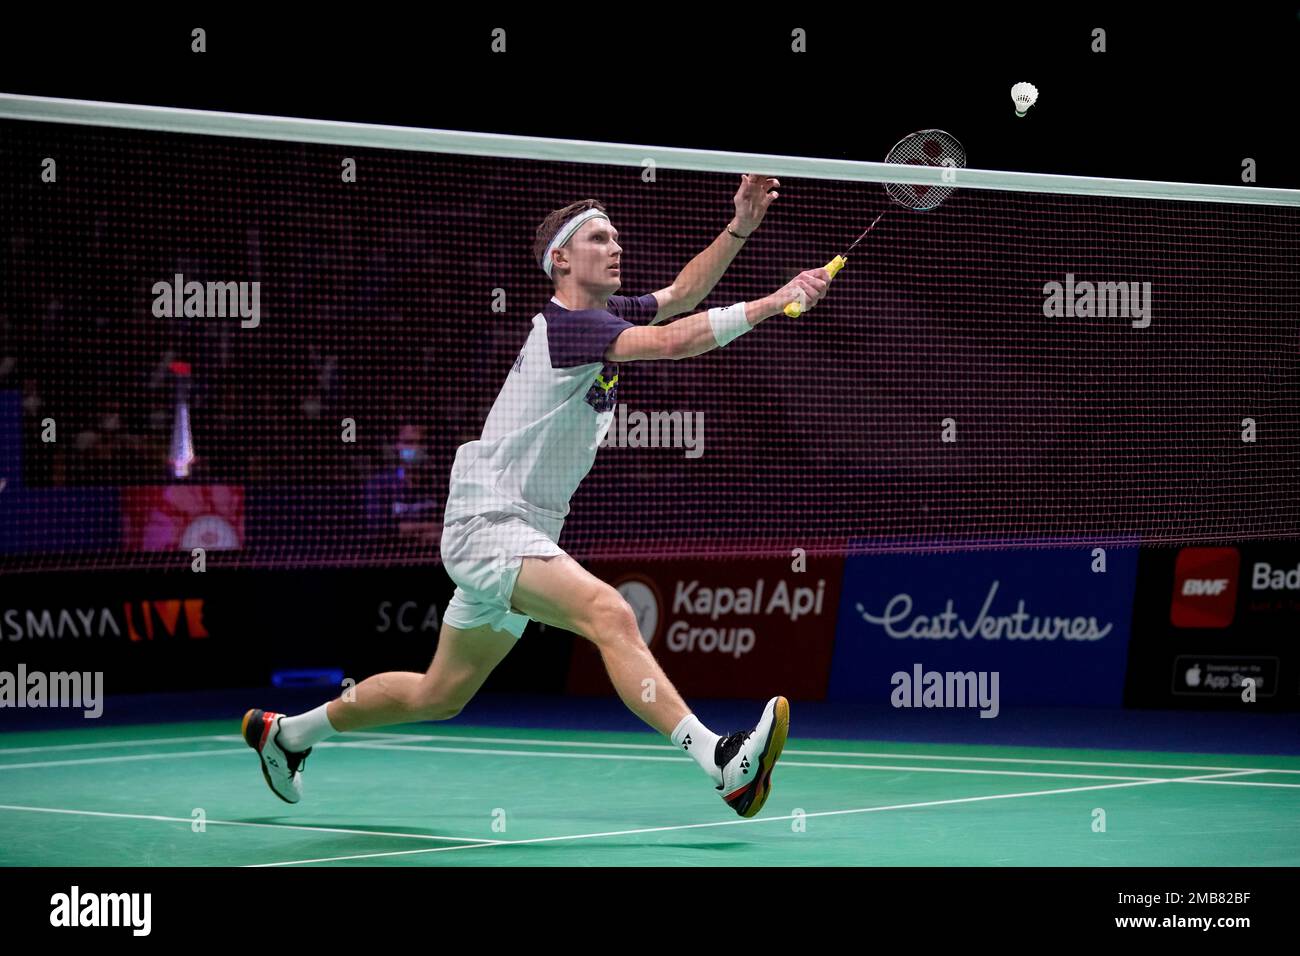 Denmarks Viktor Axelsen plays a shot against Chinas Zhao Jun Peng during their mens singles final match at Indonesia Open badminton tournament at Istora Gelora Bung Karno Stadium in Jakarta, Indonesia, Sunday,